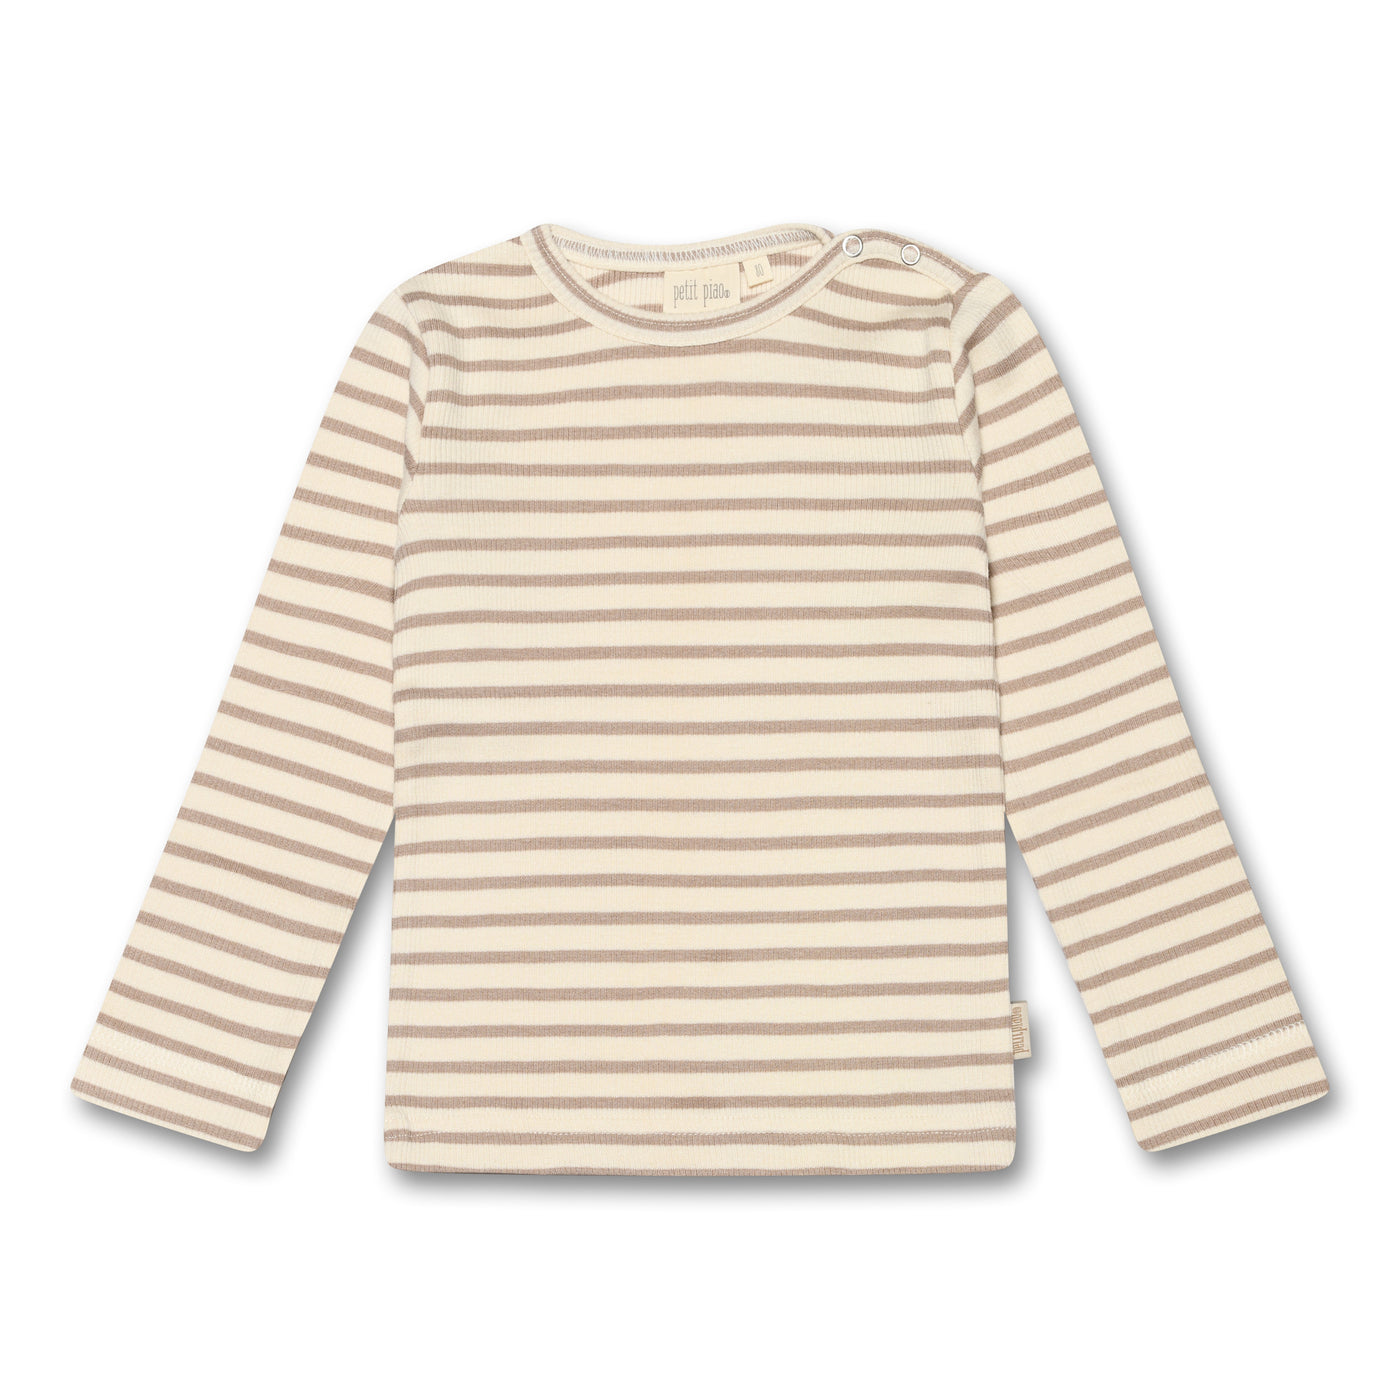 Petit piao T-shirt L/S Modal Simply Taupe.